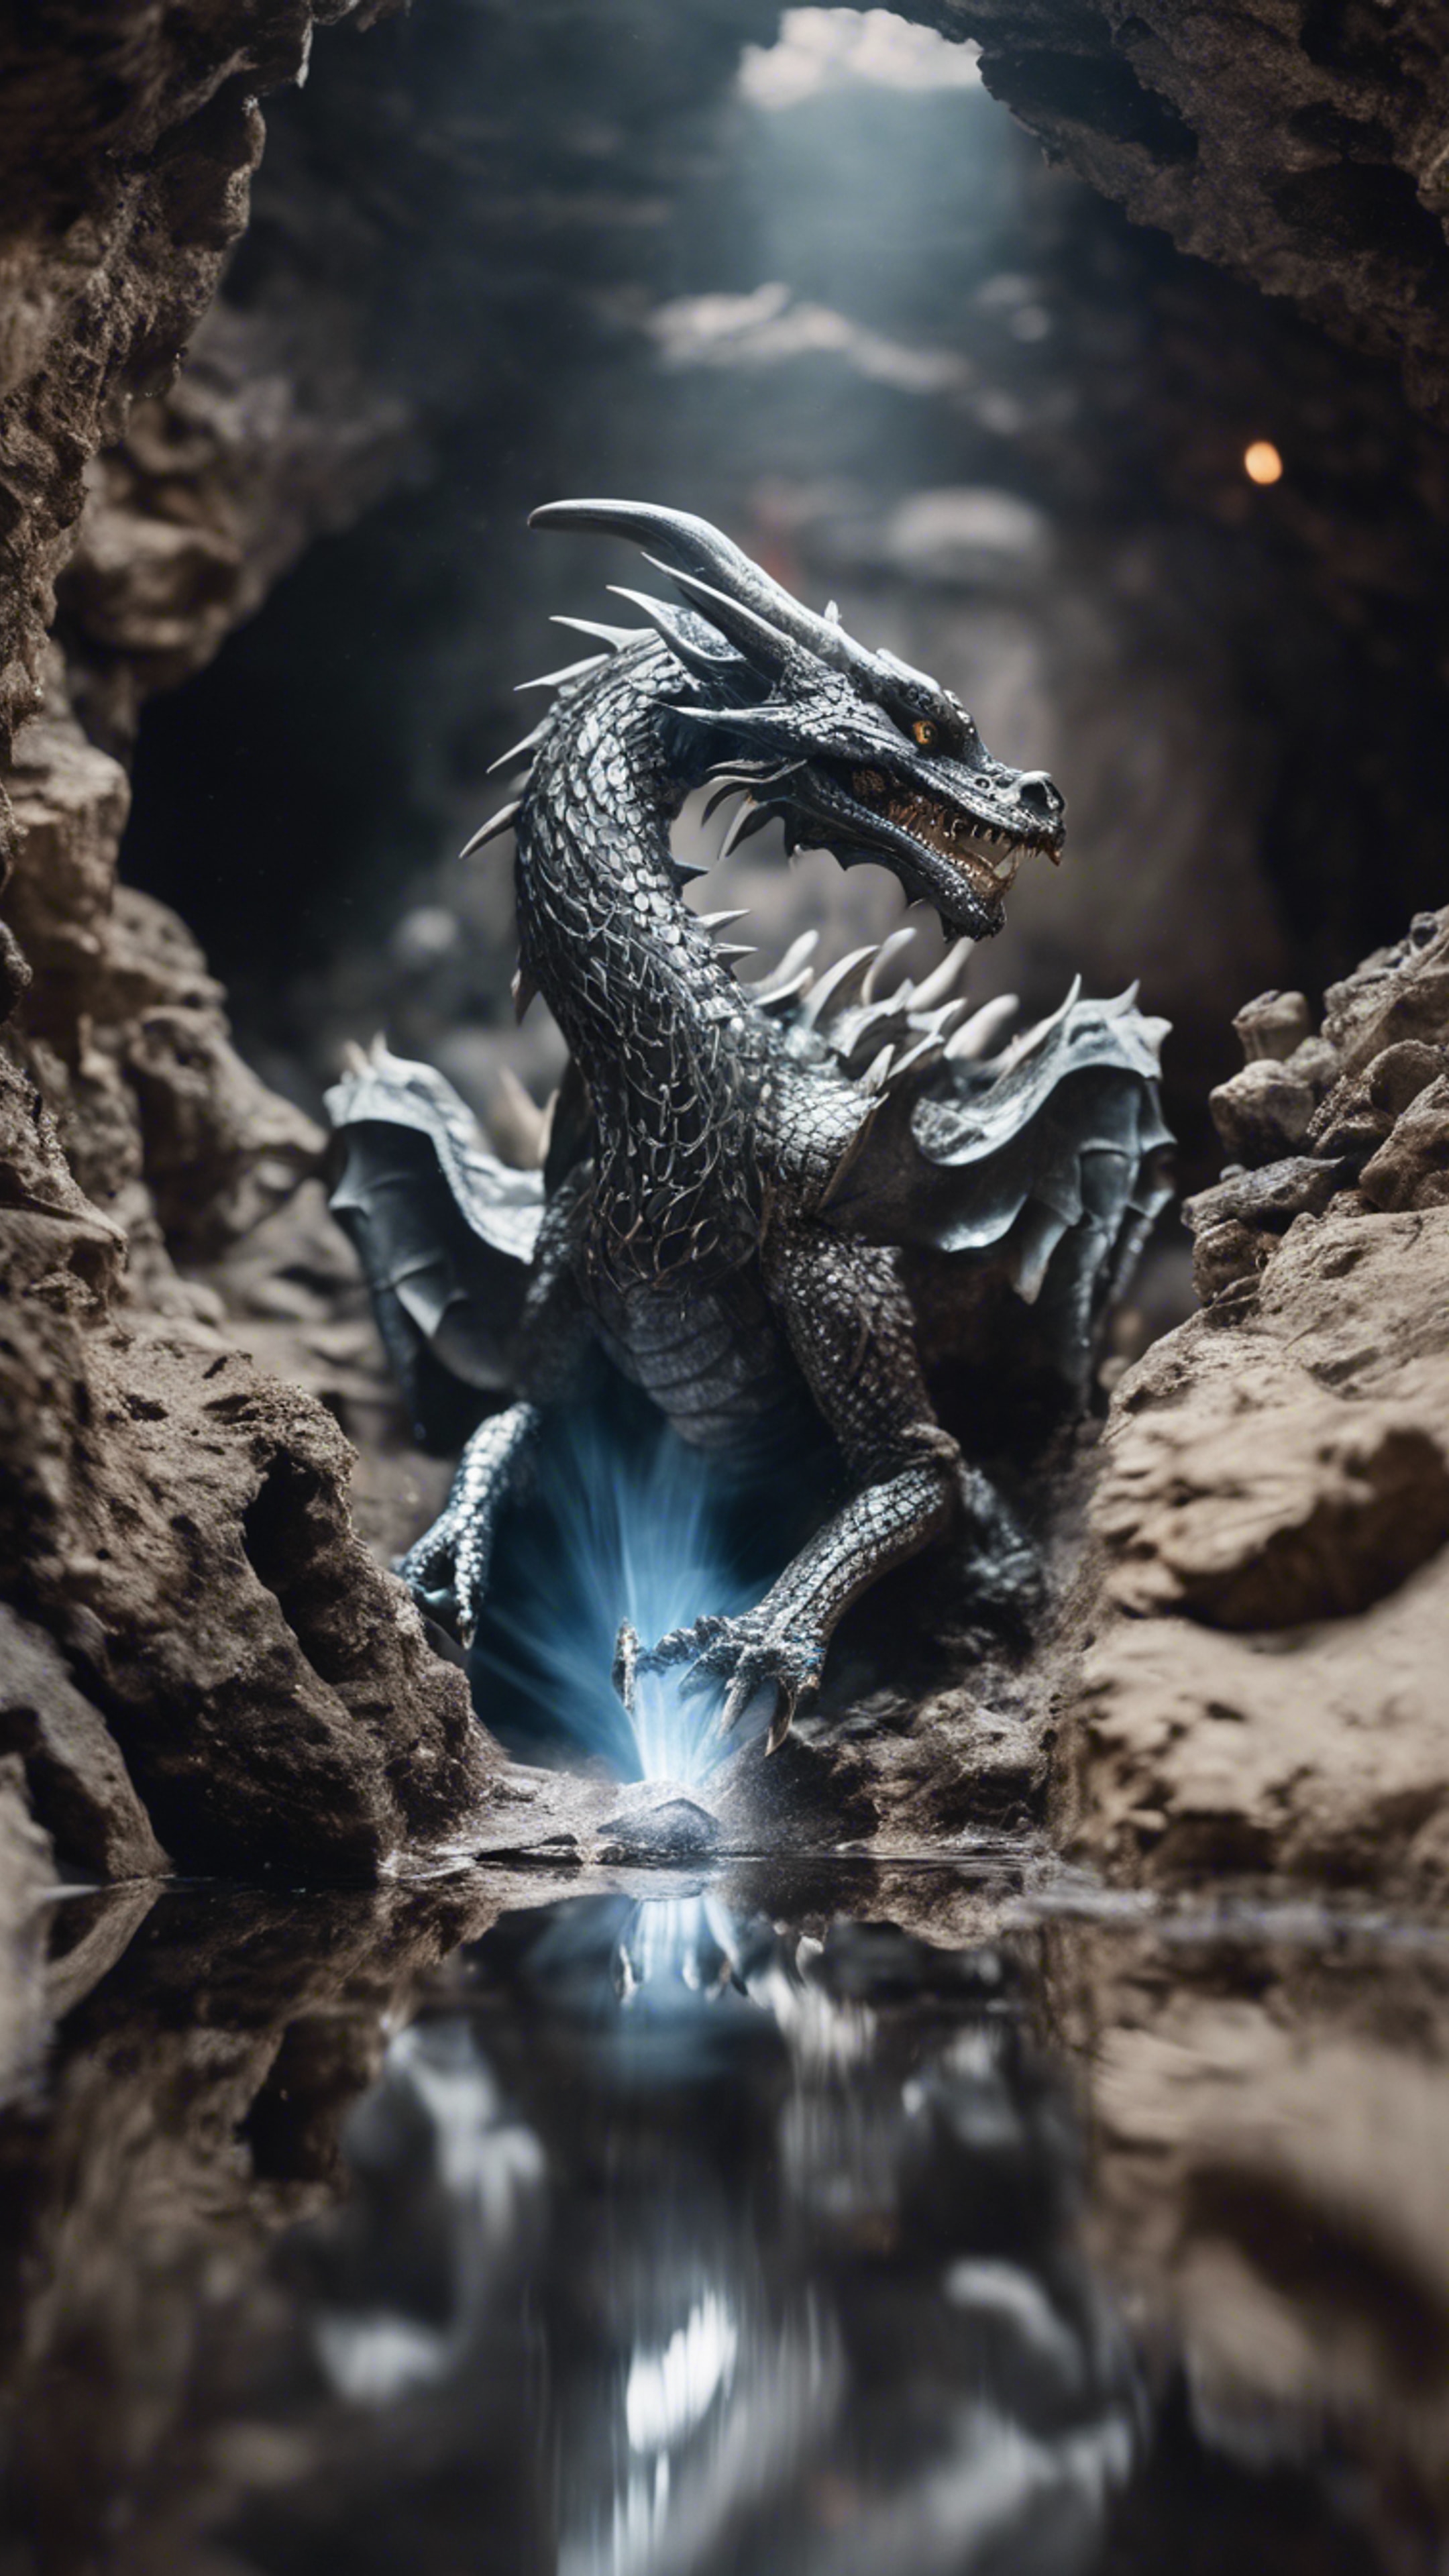 A cool dragon of pure quicksilver, fluid and reflective, darting through a forgotten mine shaft. Tapet[4f182db5f22341209a39]